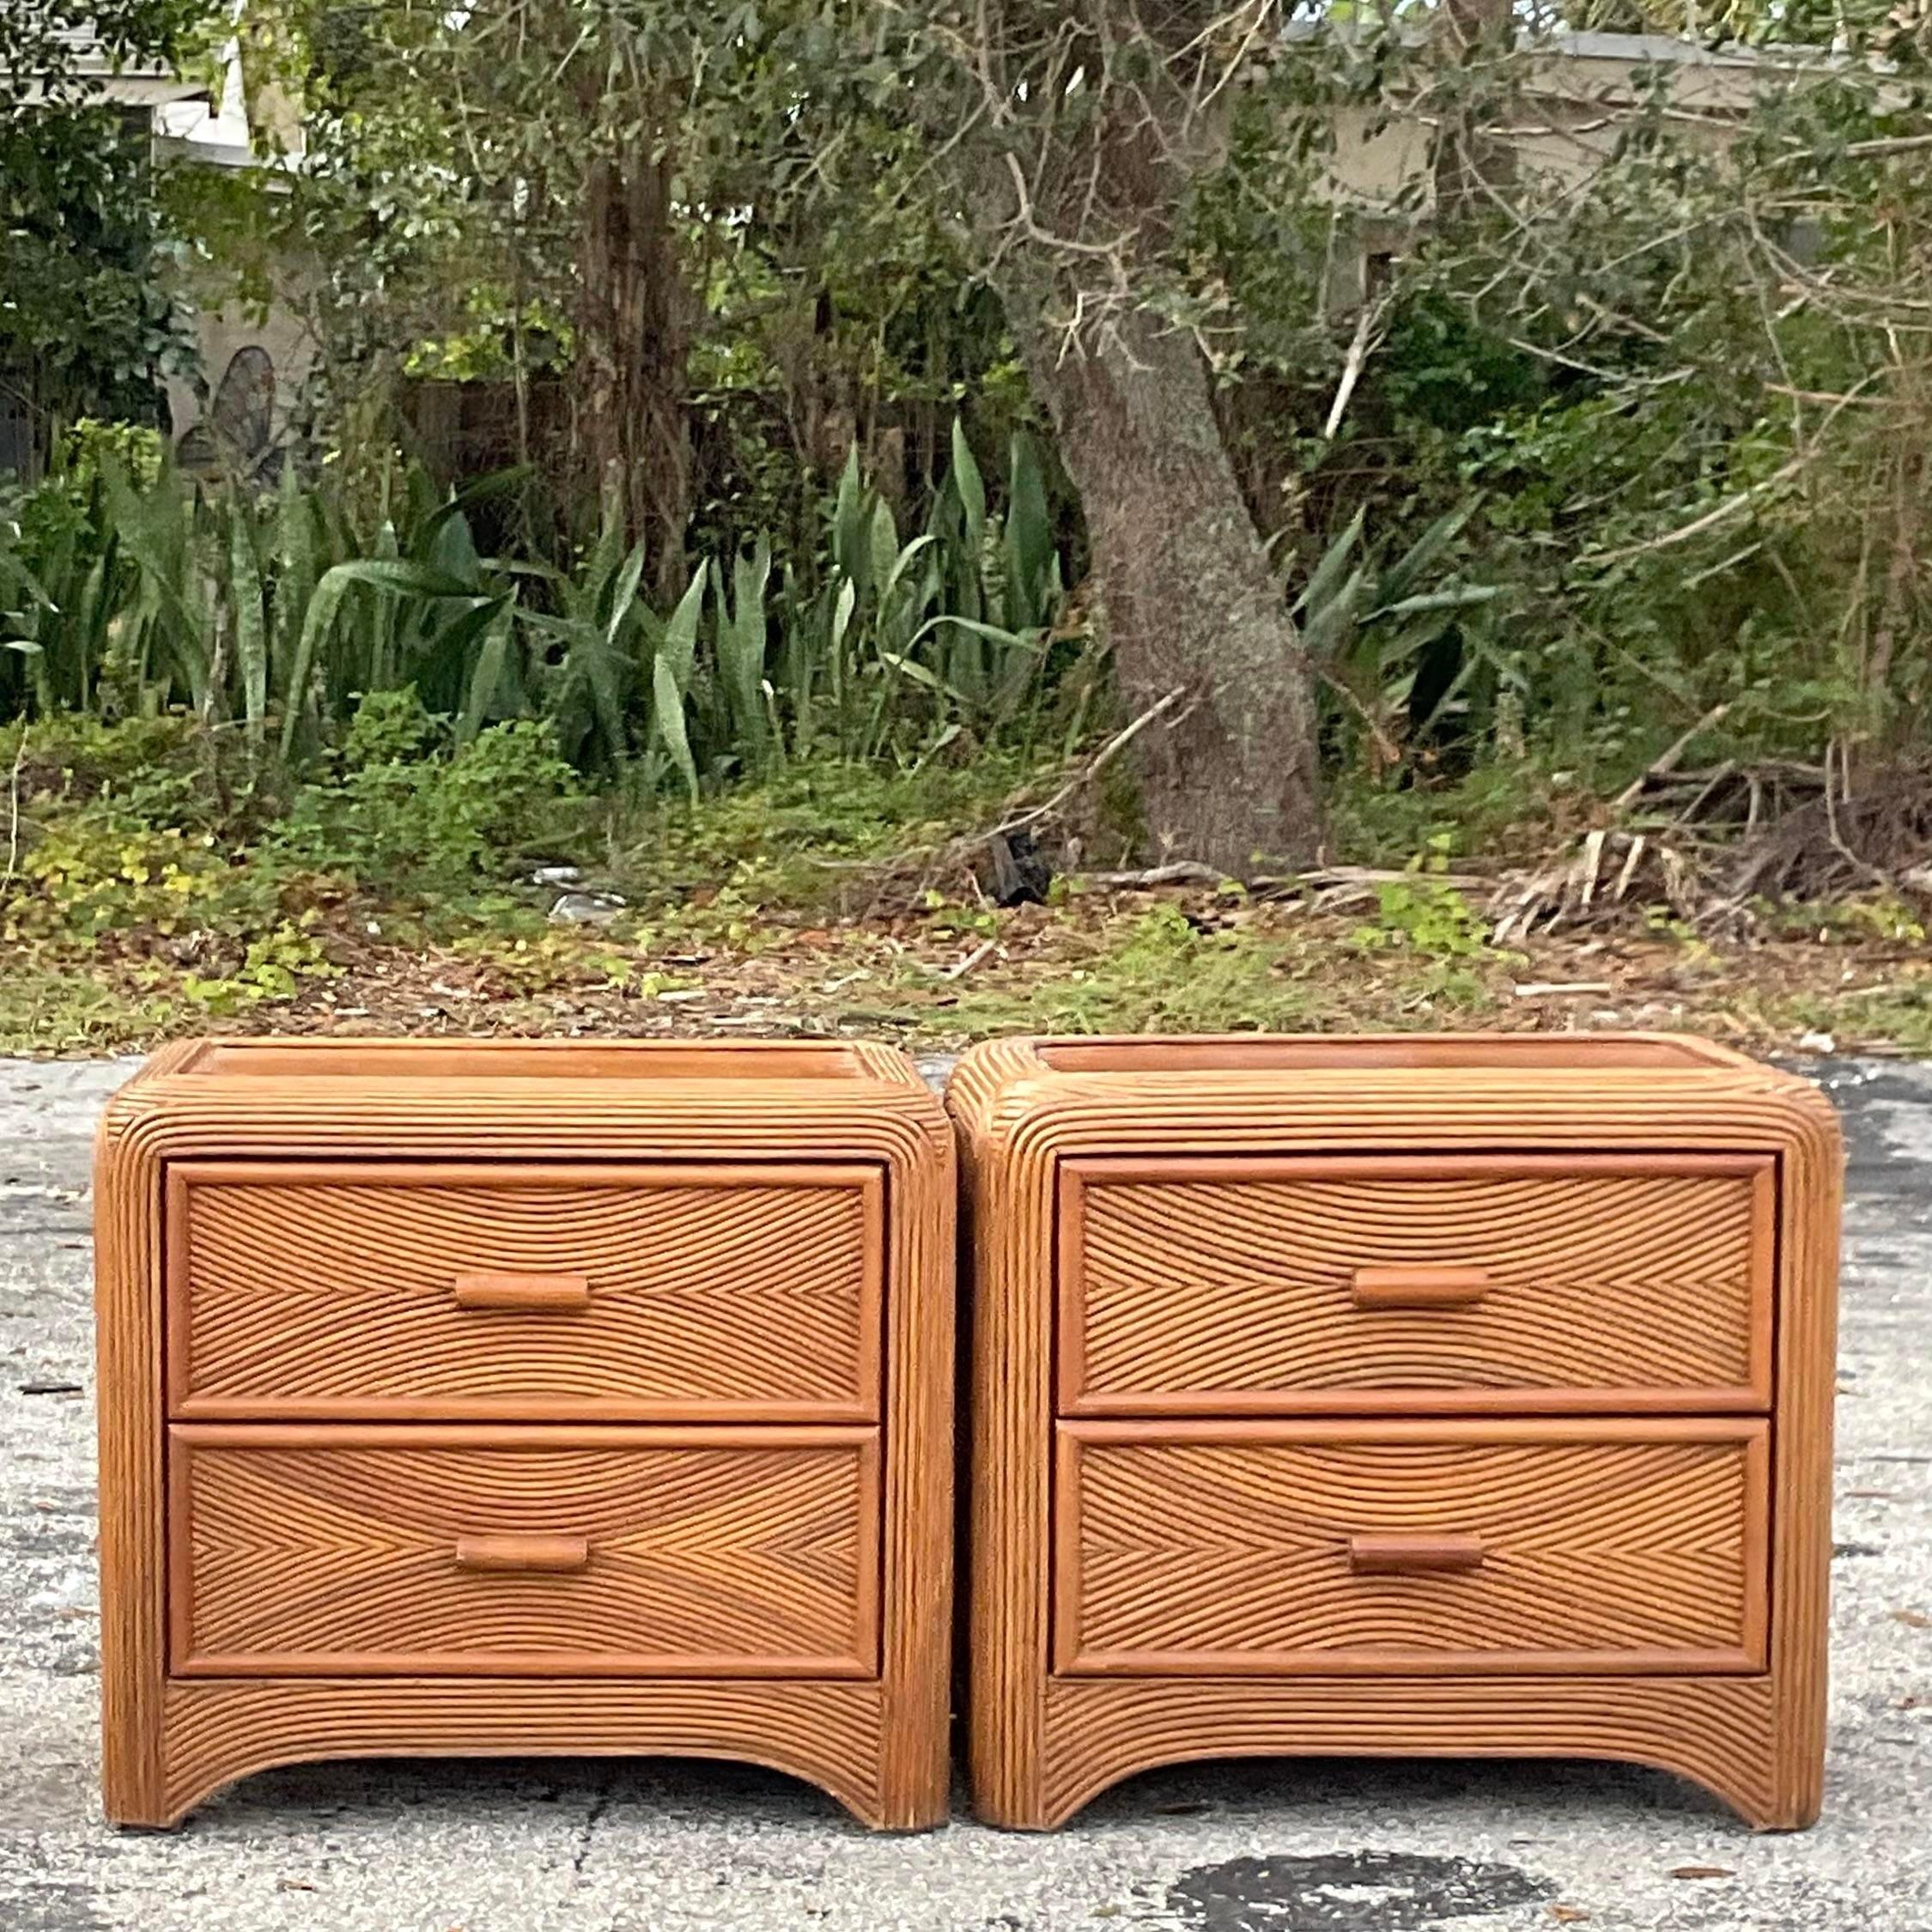 A fabulous pair of vintage Coastal nightstands. A chic pencil reed cabinet in a waterfall shape. Acquired from a Palm Beach estate.